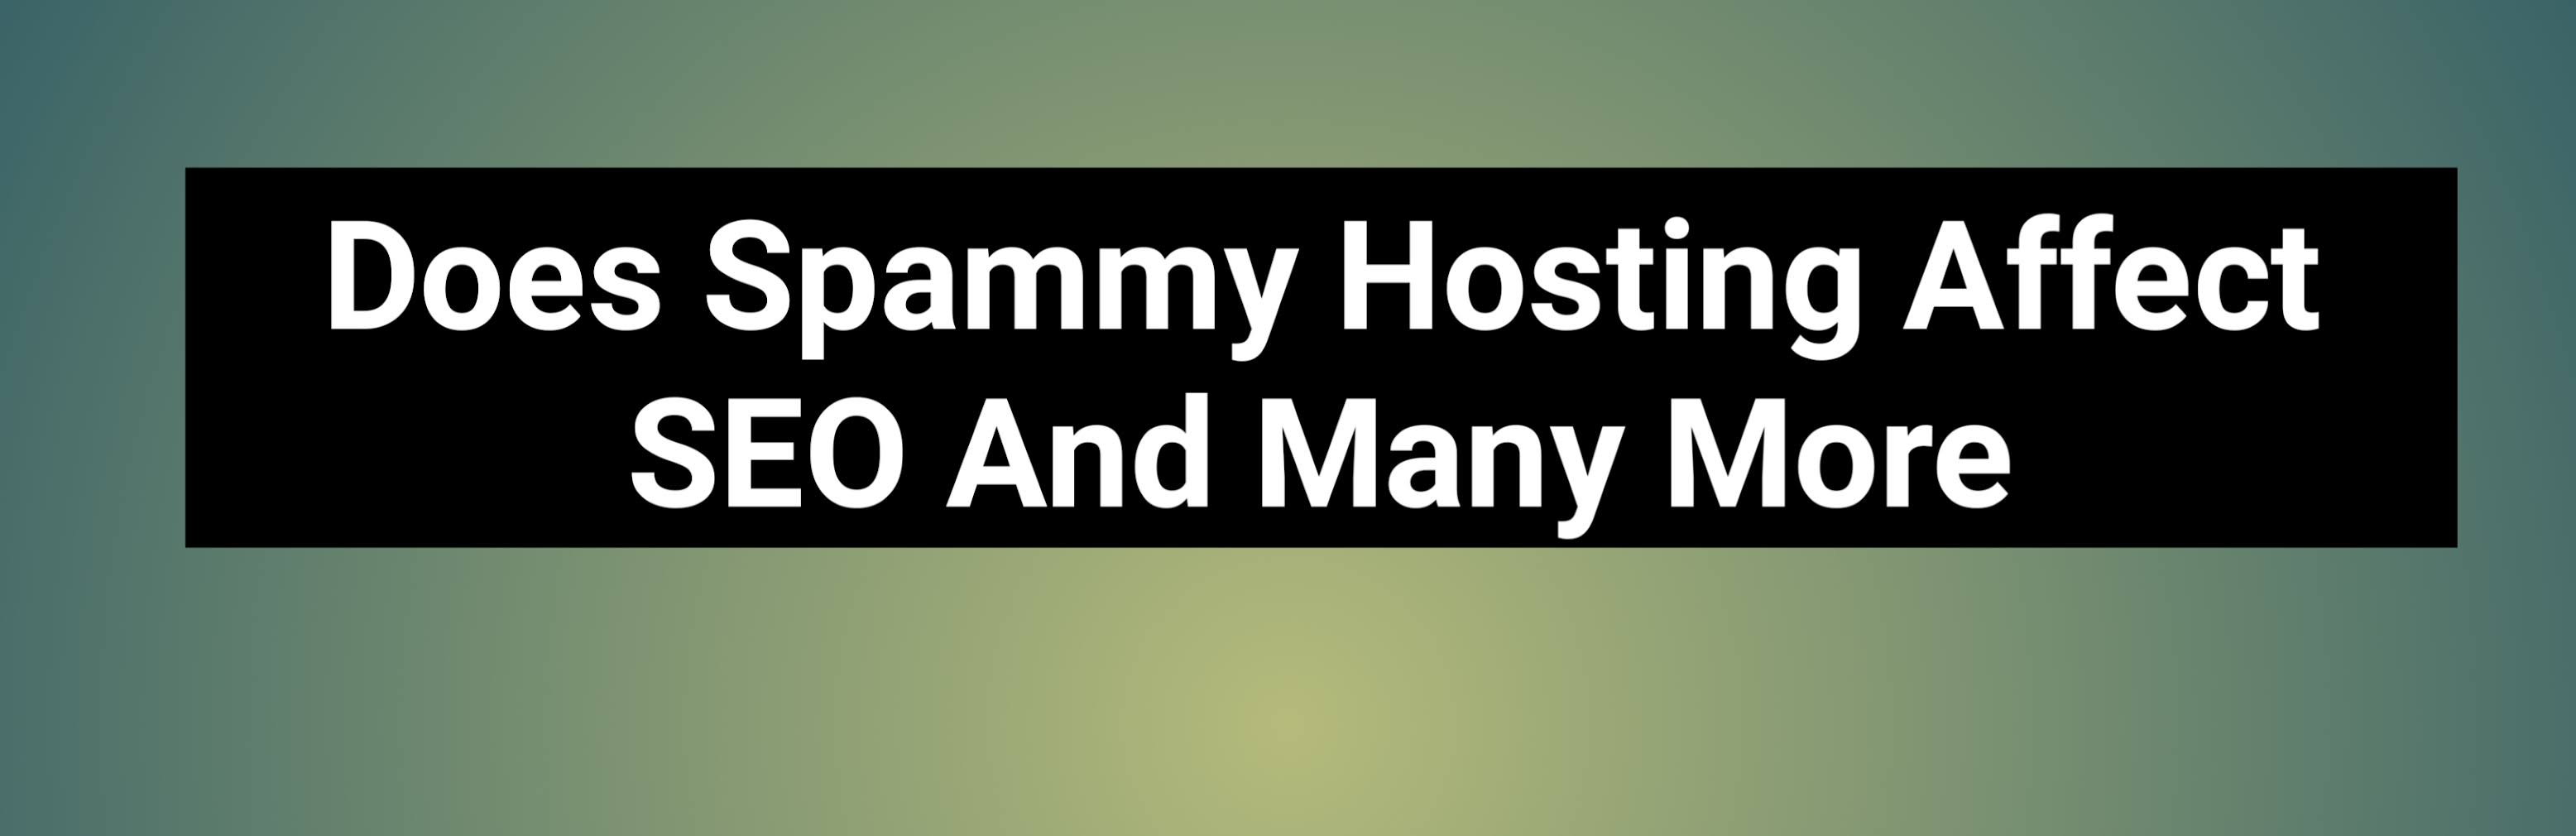 Does Spammy Hosting Affect SEO And Many More ?